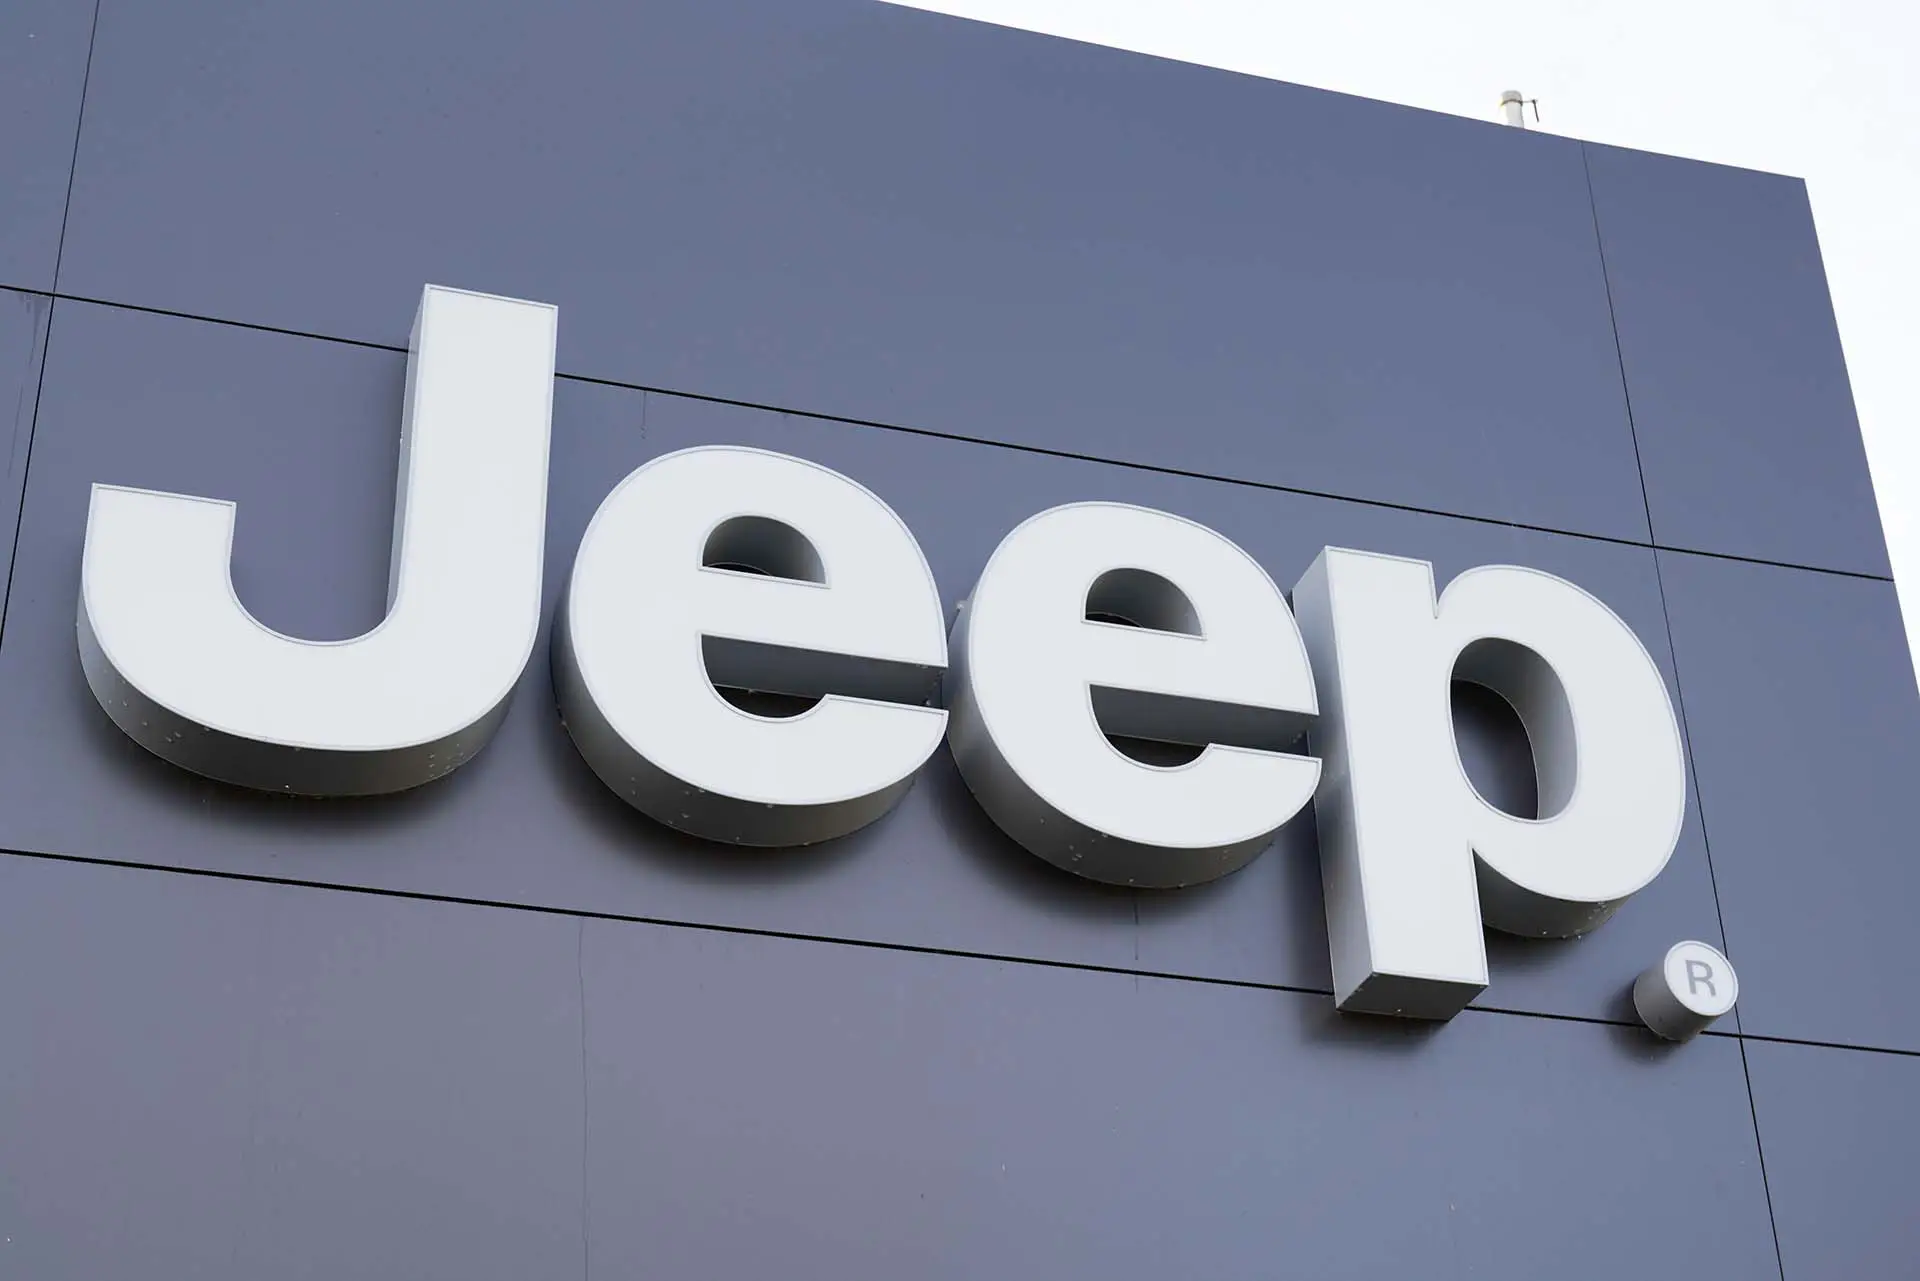 Jeep logo dealership sign car store part Fiat Chrysler Automobiles shop sport utility vehicles suv and off-road